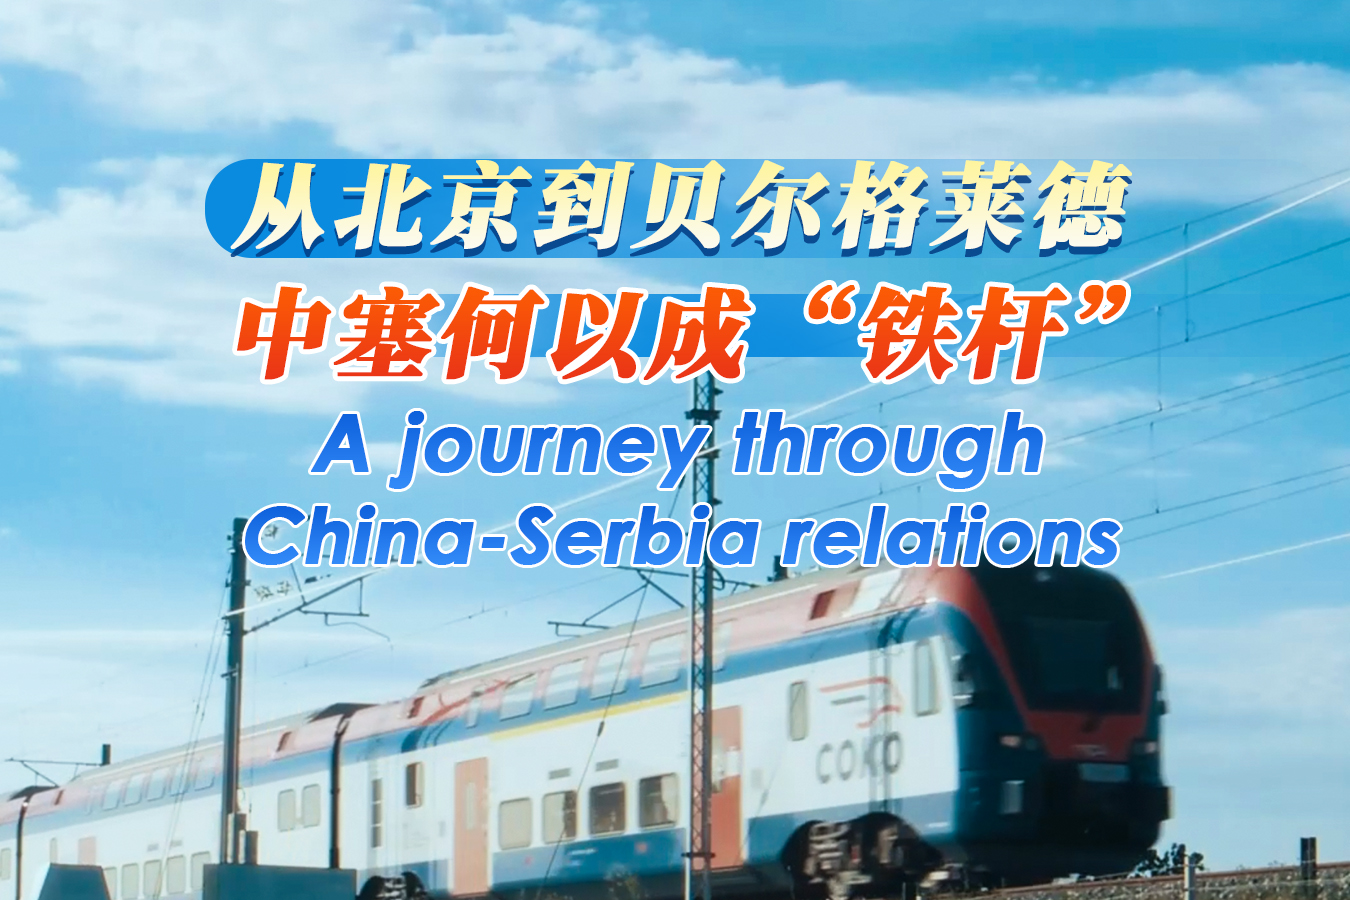 A journey through China-Serbia relations